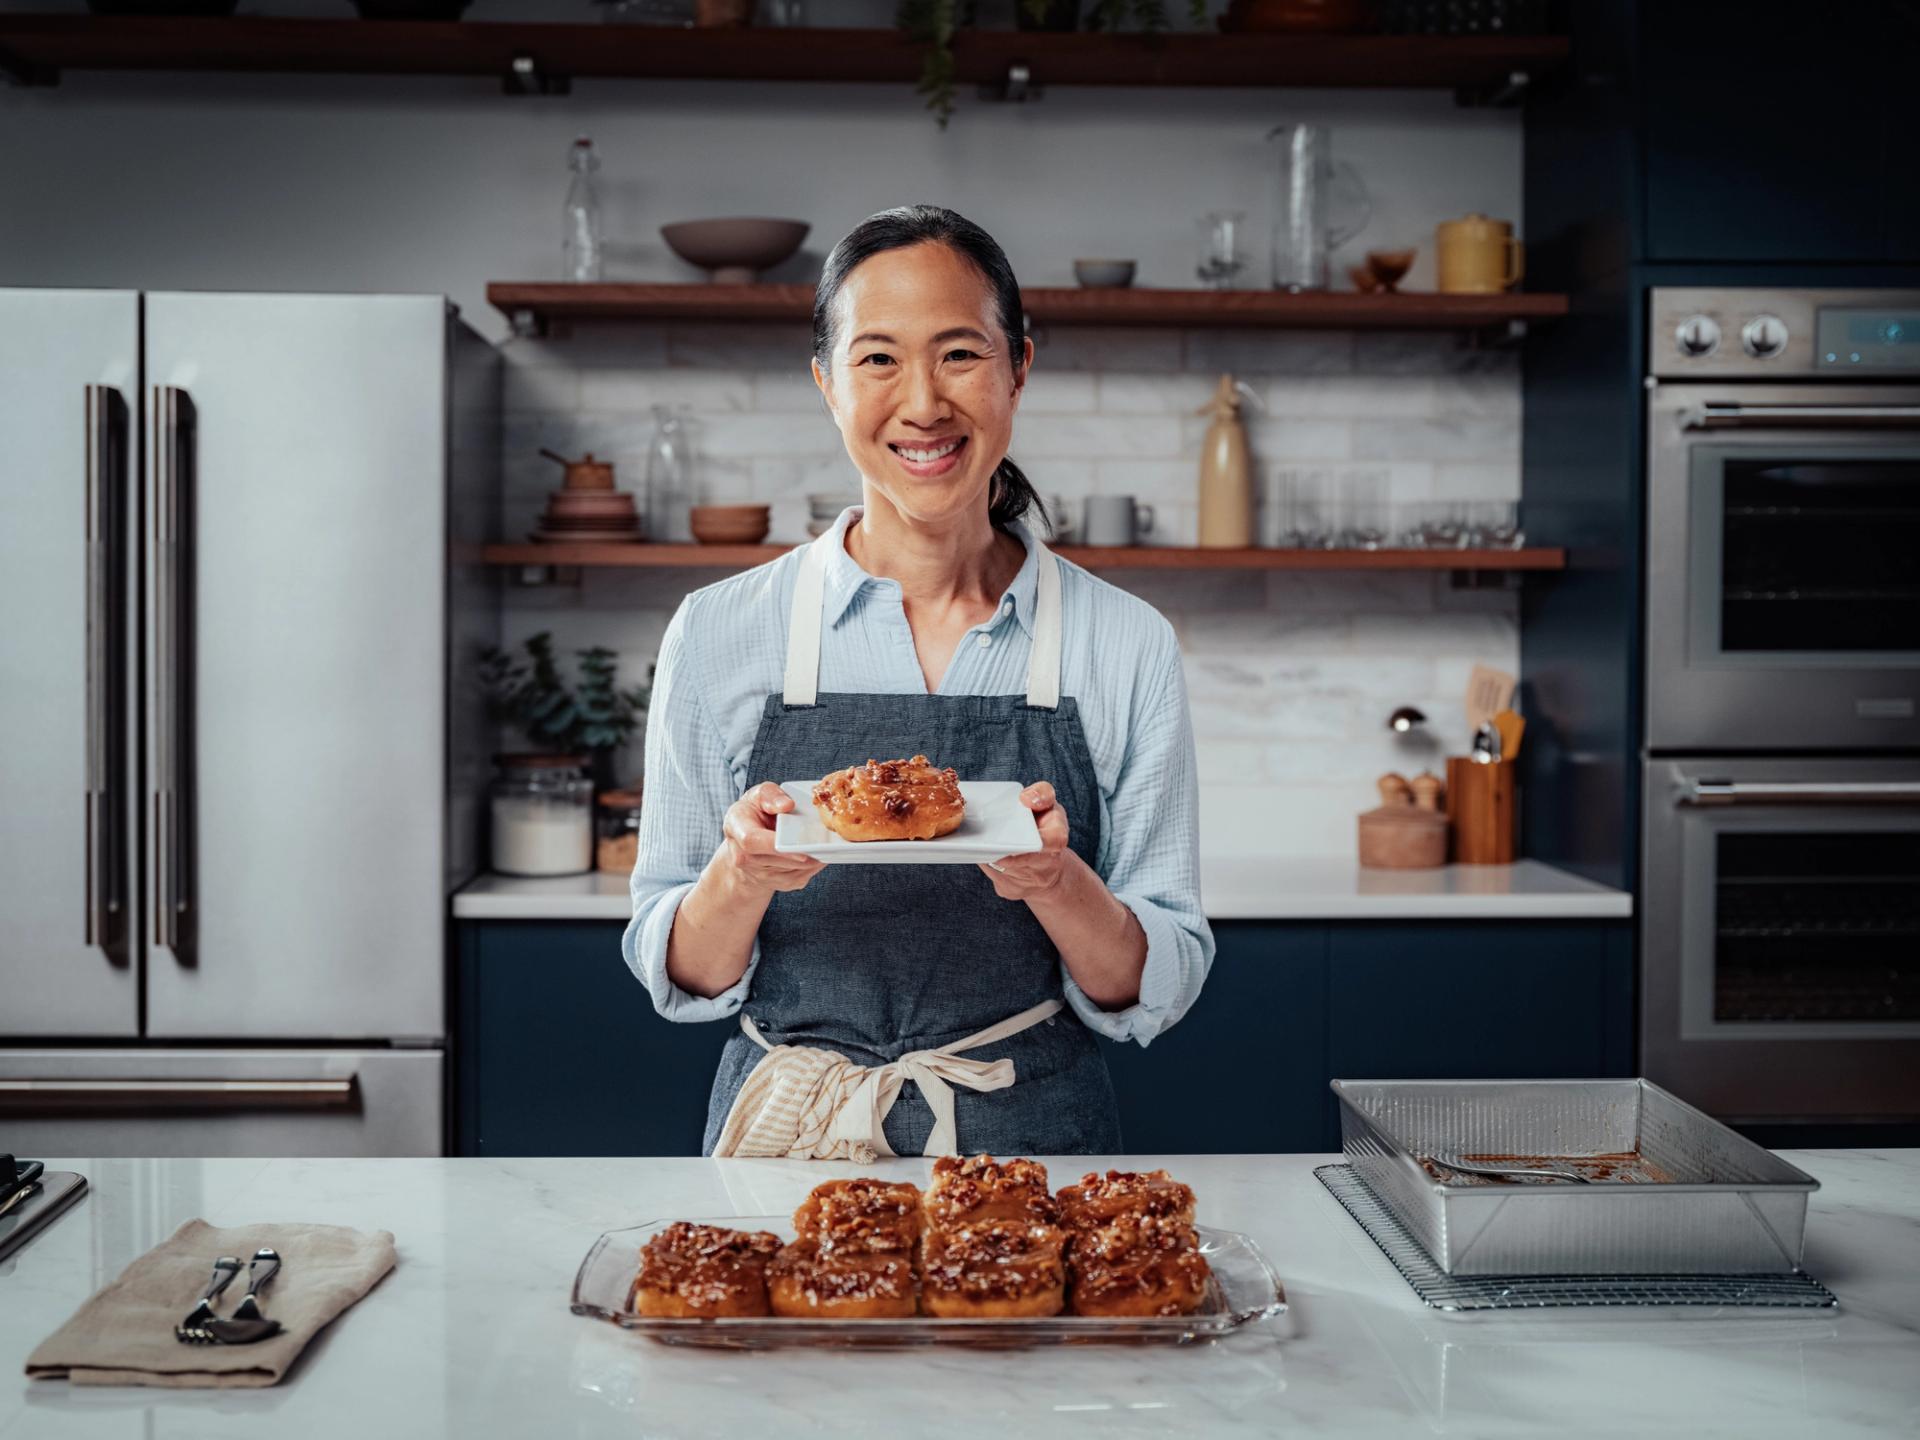 Joanne Chang and her Famous Sticky sticky buns